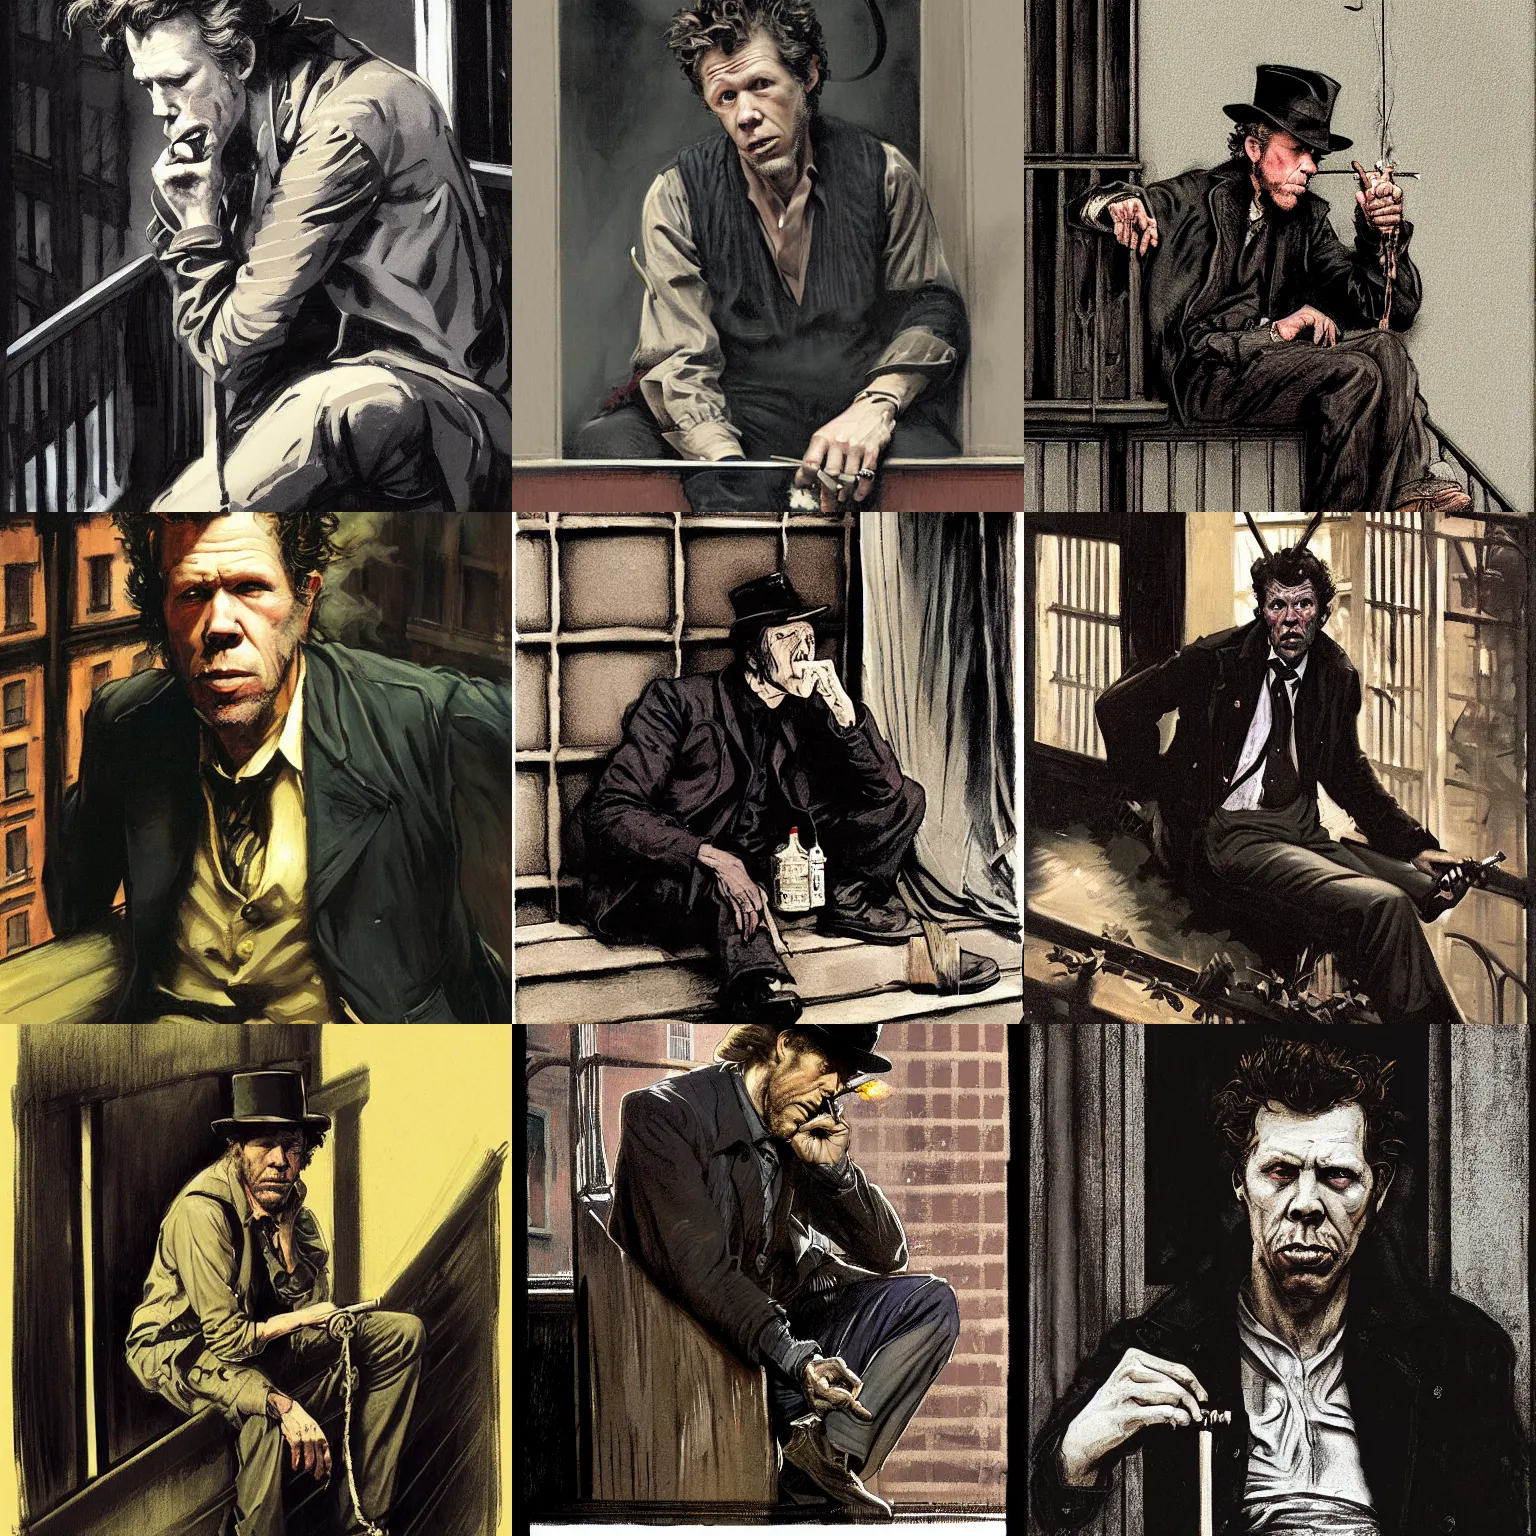 Prompt: character portrait of a rugged tom waits sitting down on a fire escape smoking a cigarette in gothic london, gothic, john singer sargent, muted colors, moody colors, illustration, digital illustration, amazing values, art by j. c. leyendecker, joseph christian leyendecker, william - adolphe bouguerea, graphic style, dramatic lighting, gothic lighting